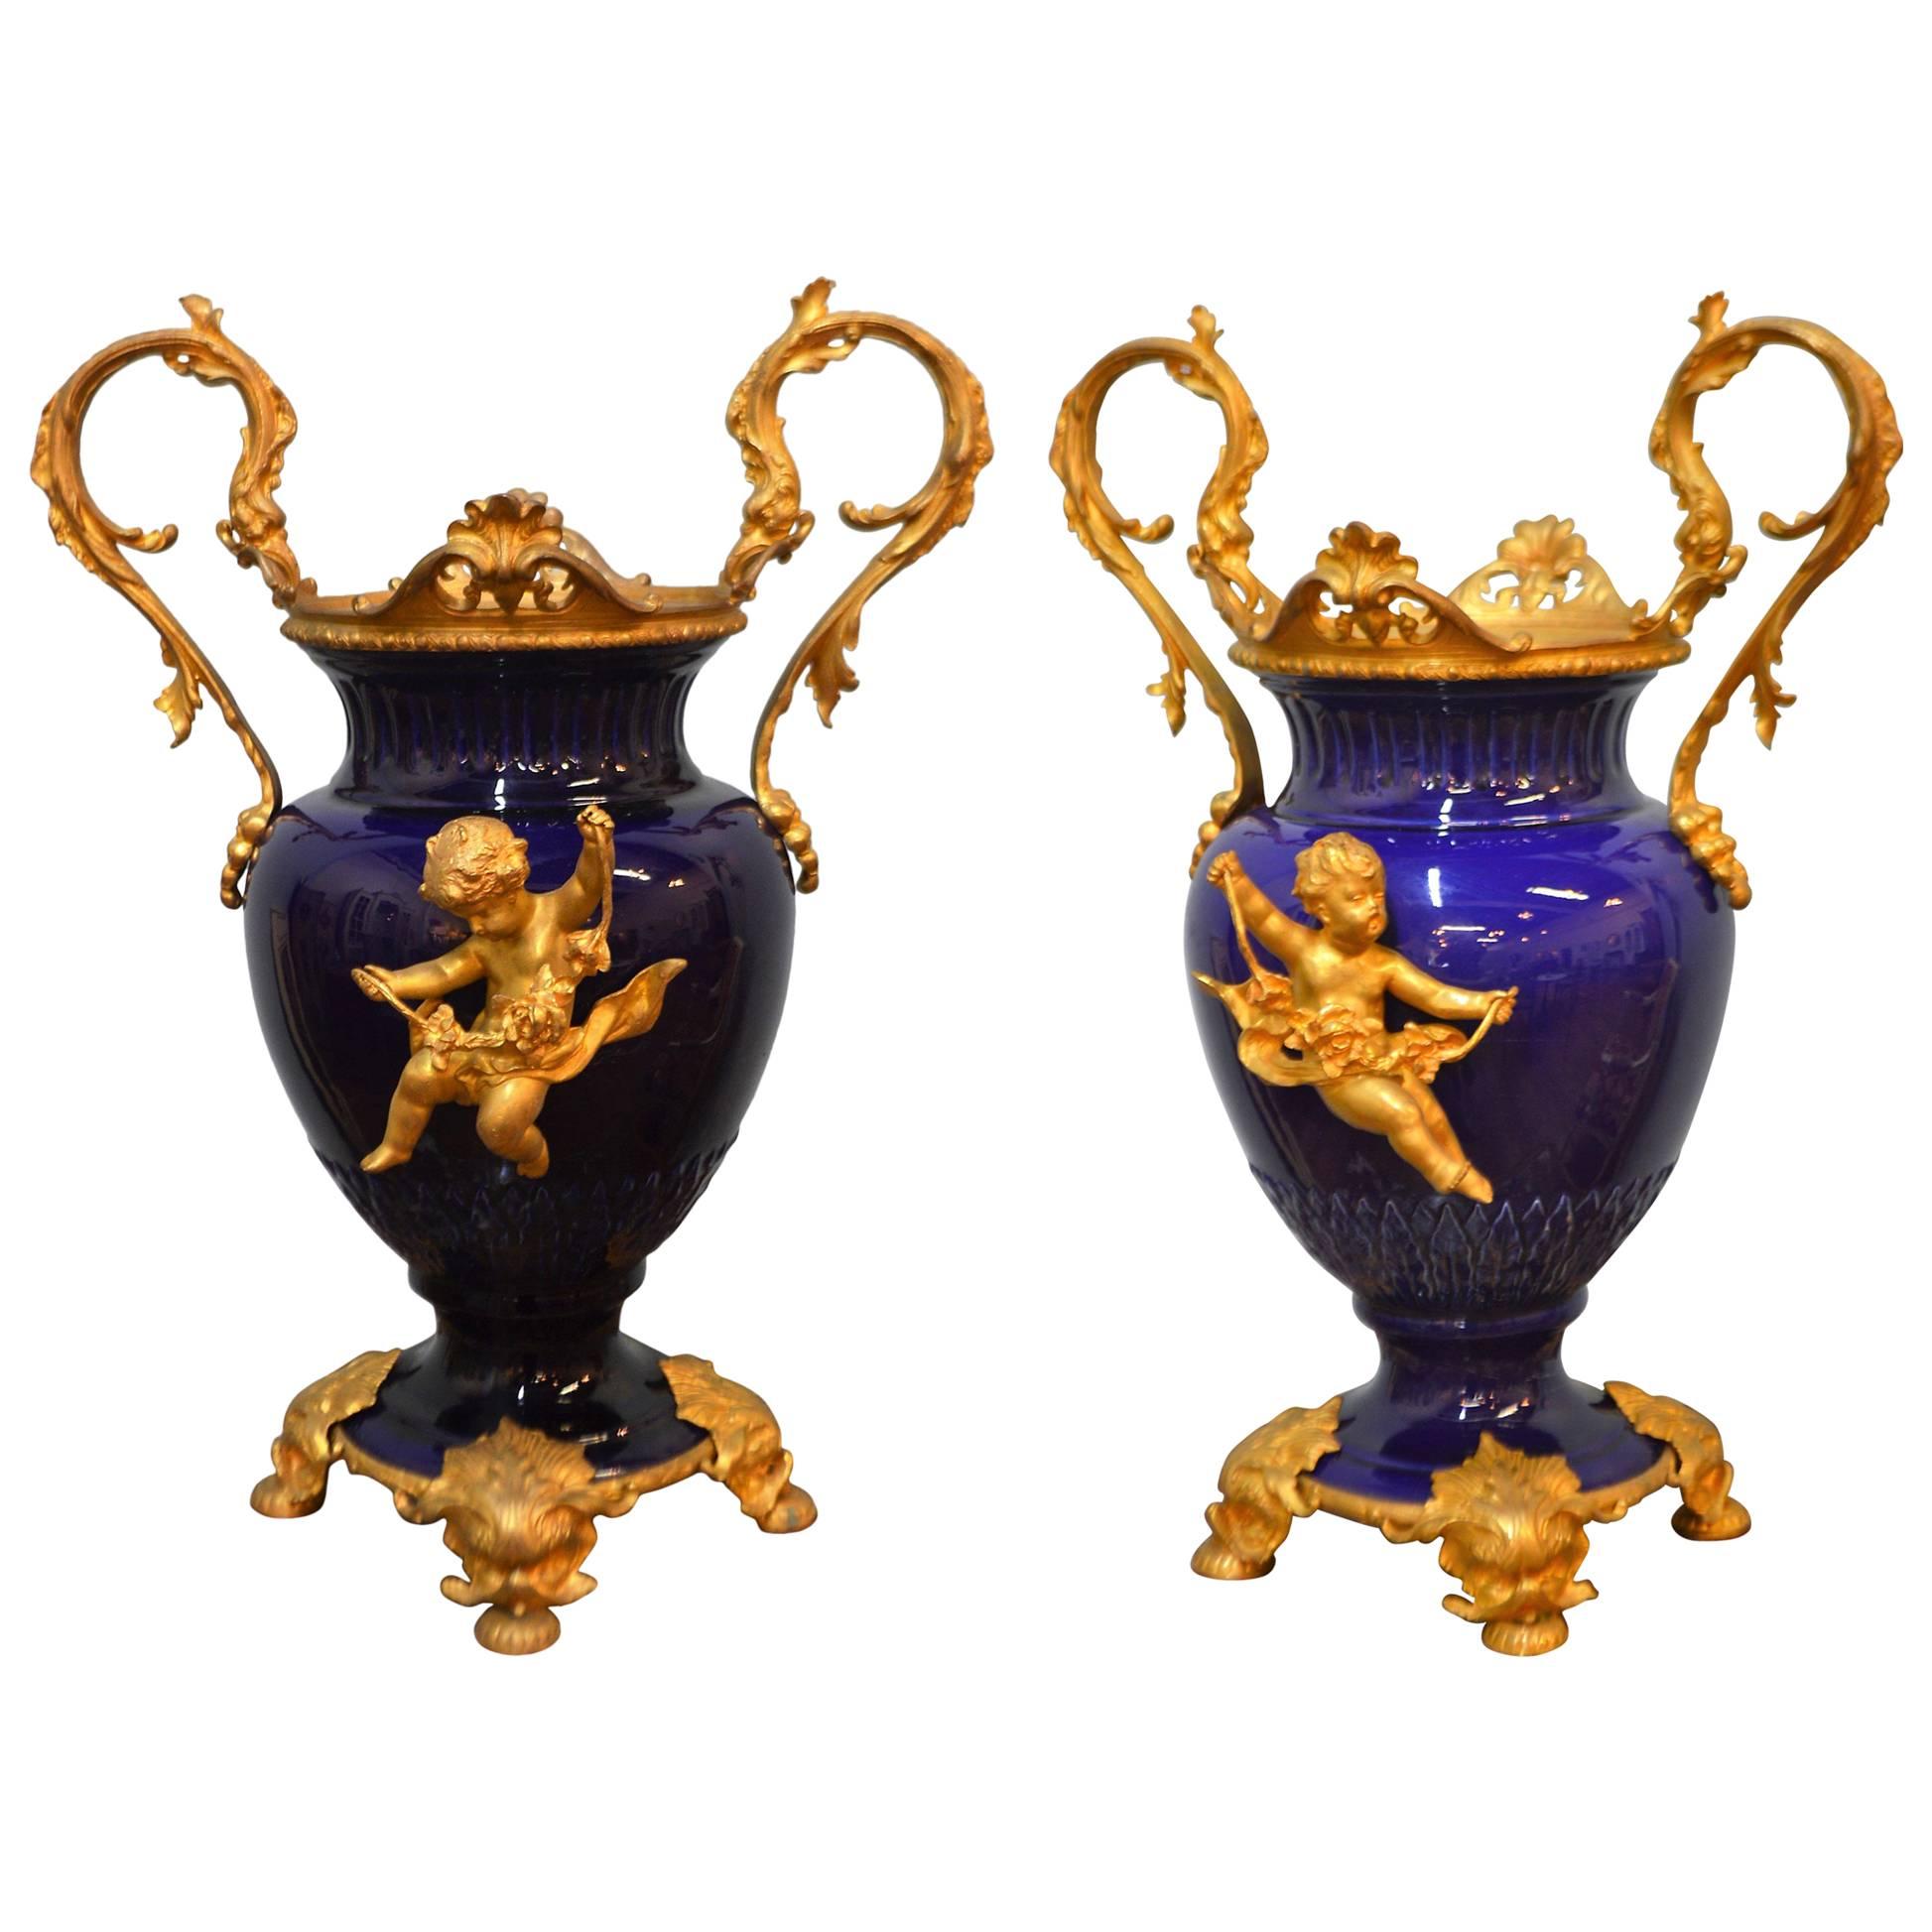 Pair of 19th Century Cobalt Blue Porcelain Urns with Fine Gilded Bronze Elements